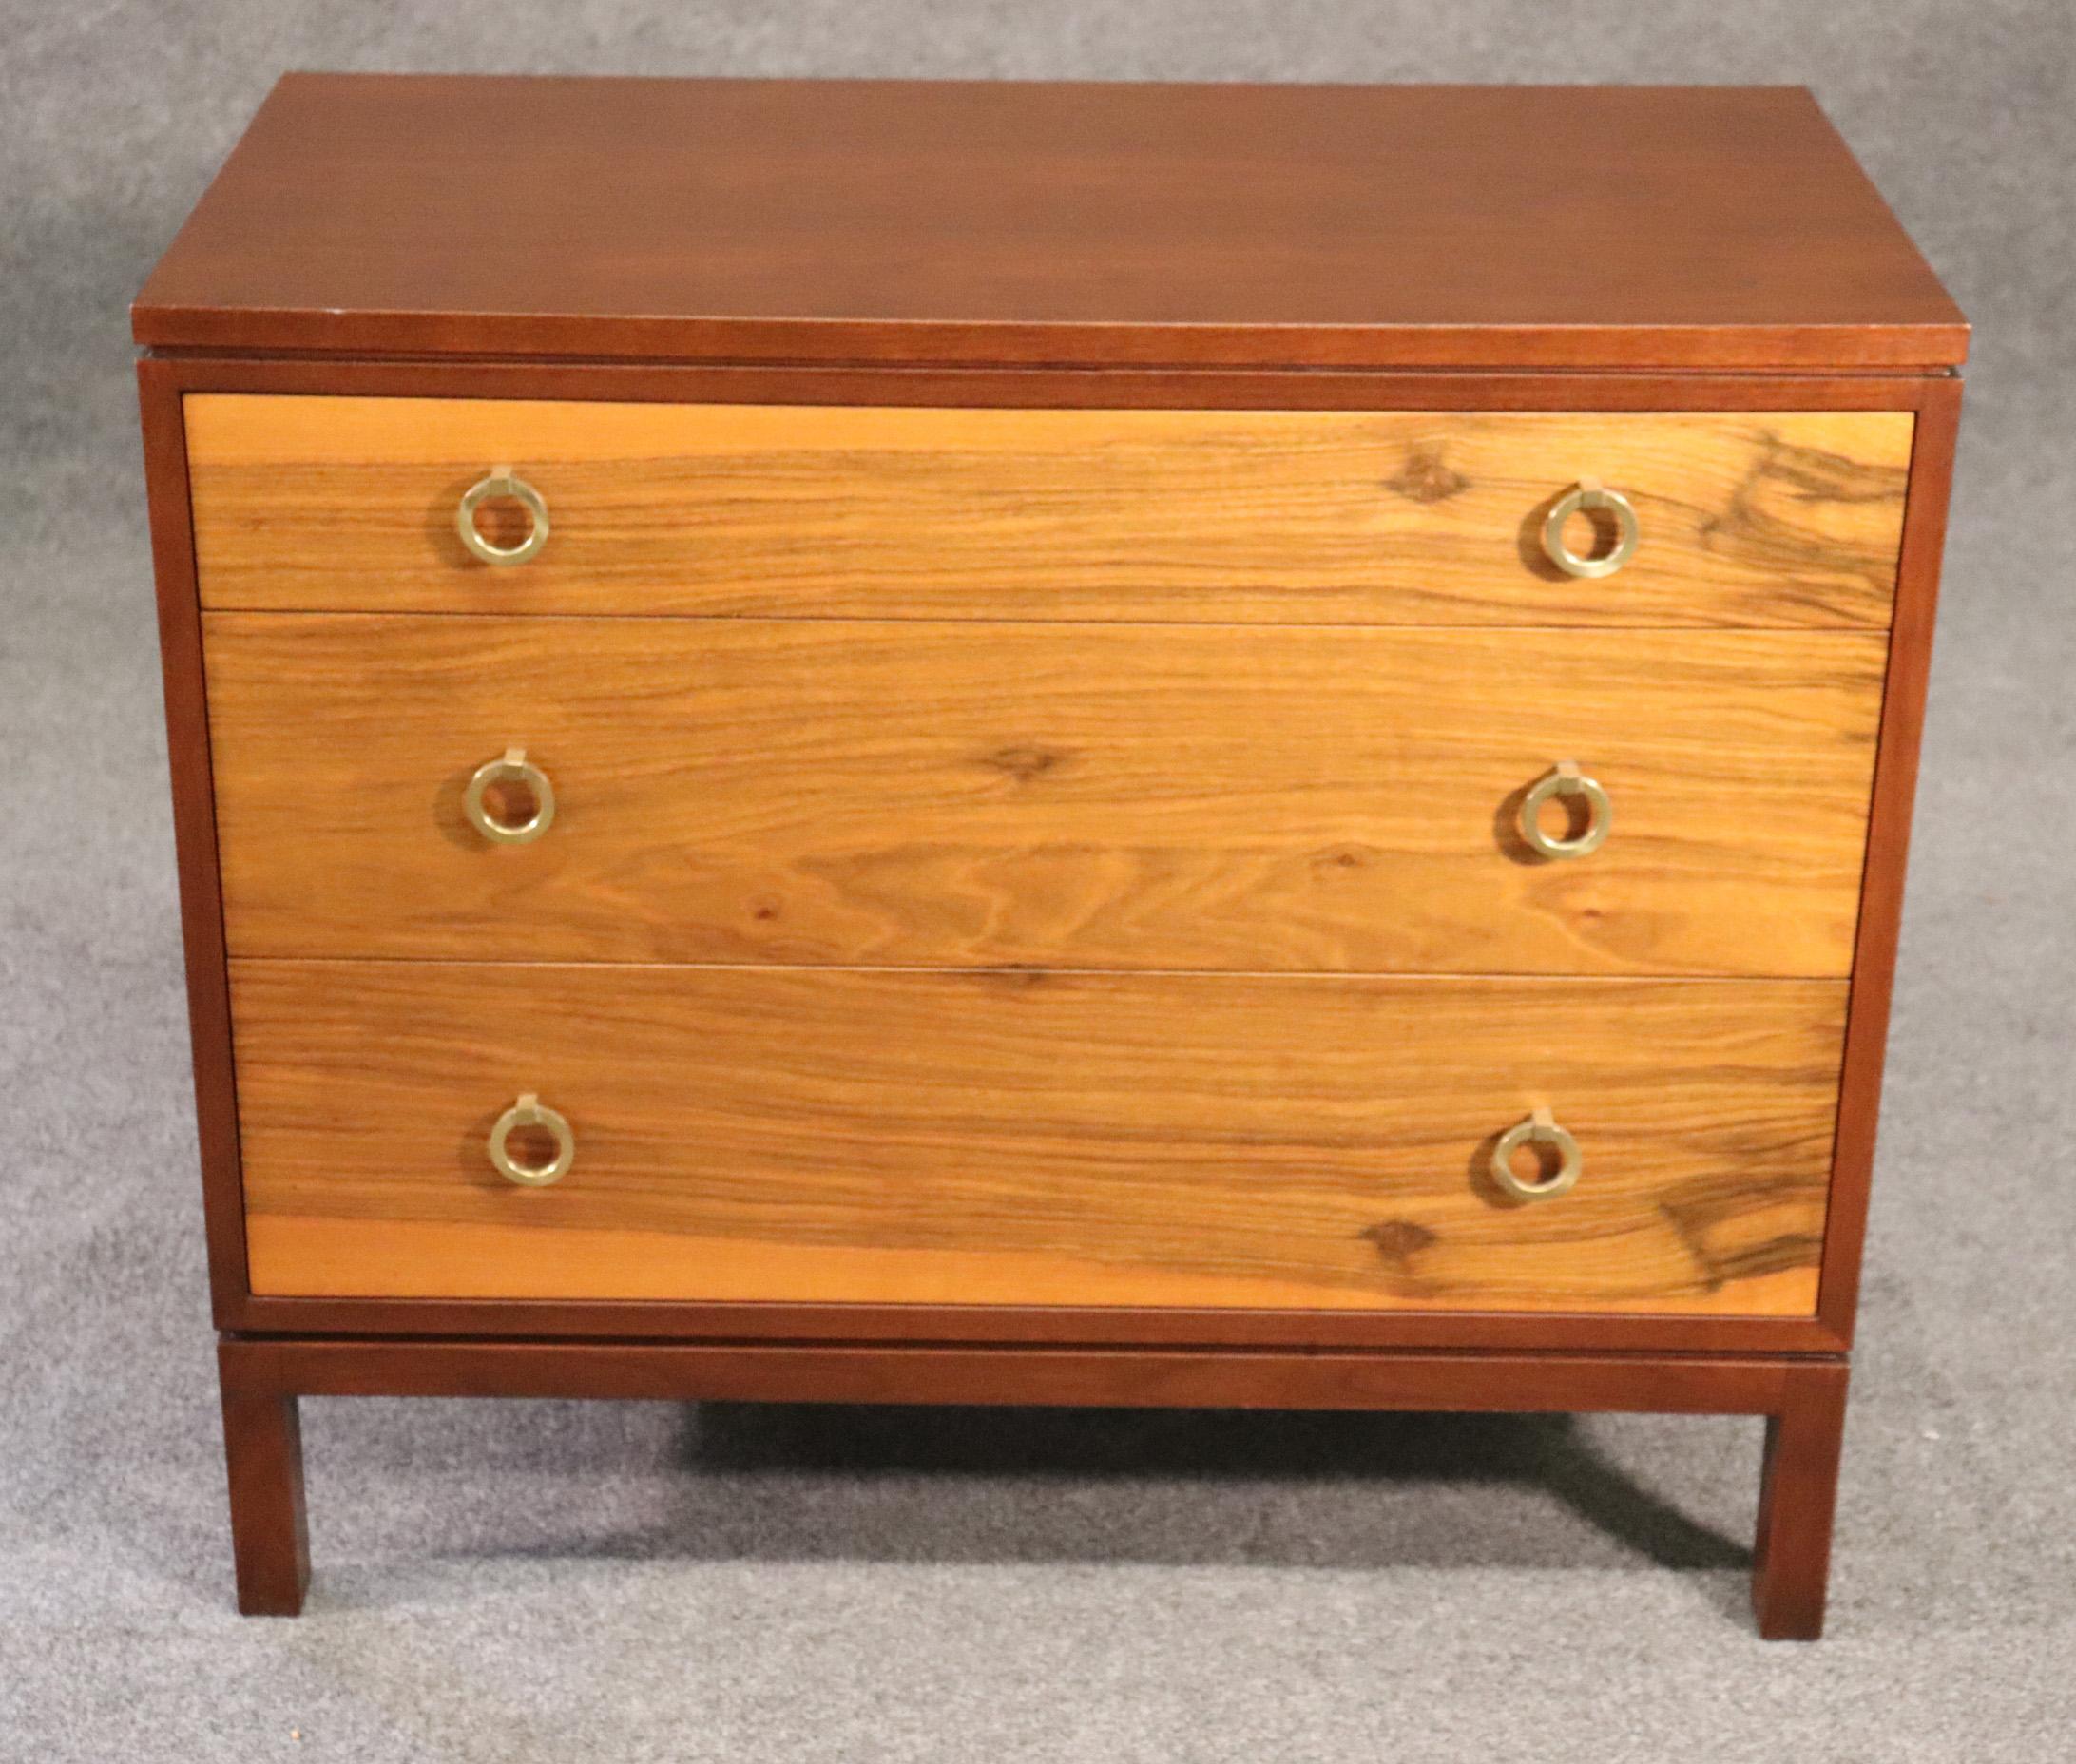 Dunbar has always been know for some of the finest furnture ever made in the United States. The commode is made of both solid walnut and solid mahogany and is in good used condition with minor signs of age and use. There are some minor scuffs and